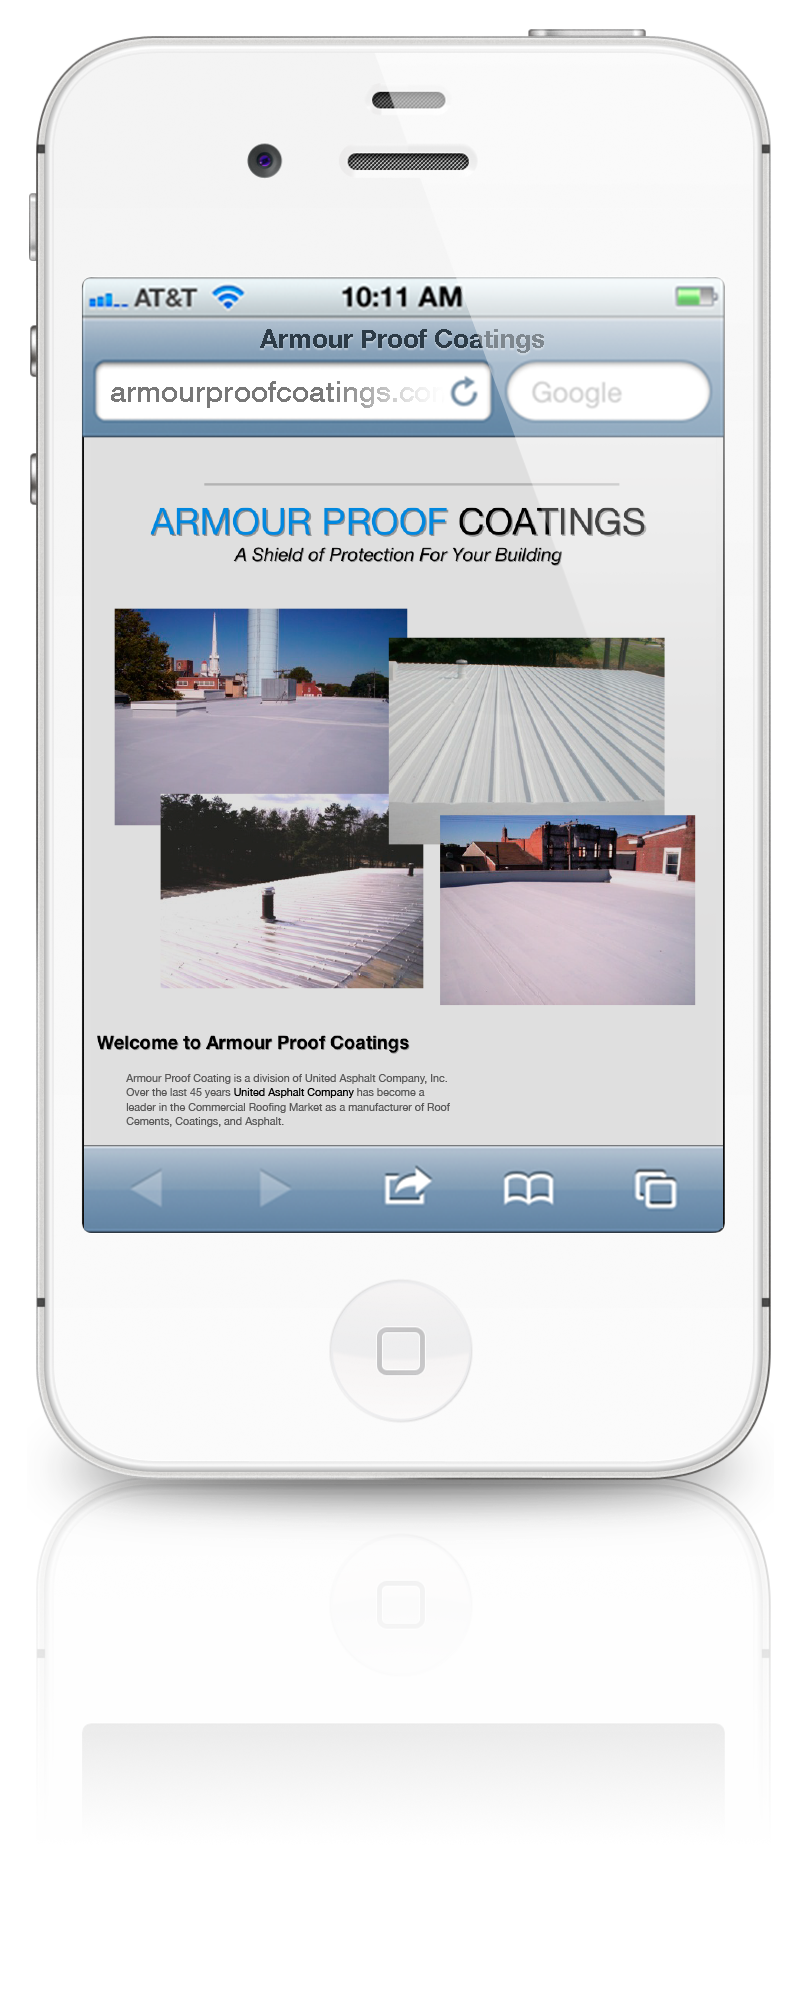 Armour Proof Coatings Initial Website Launch on an iPhone 4S